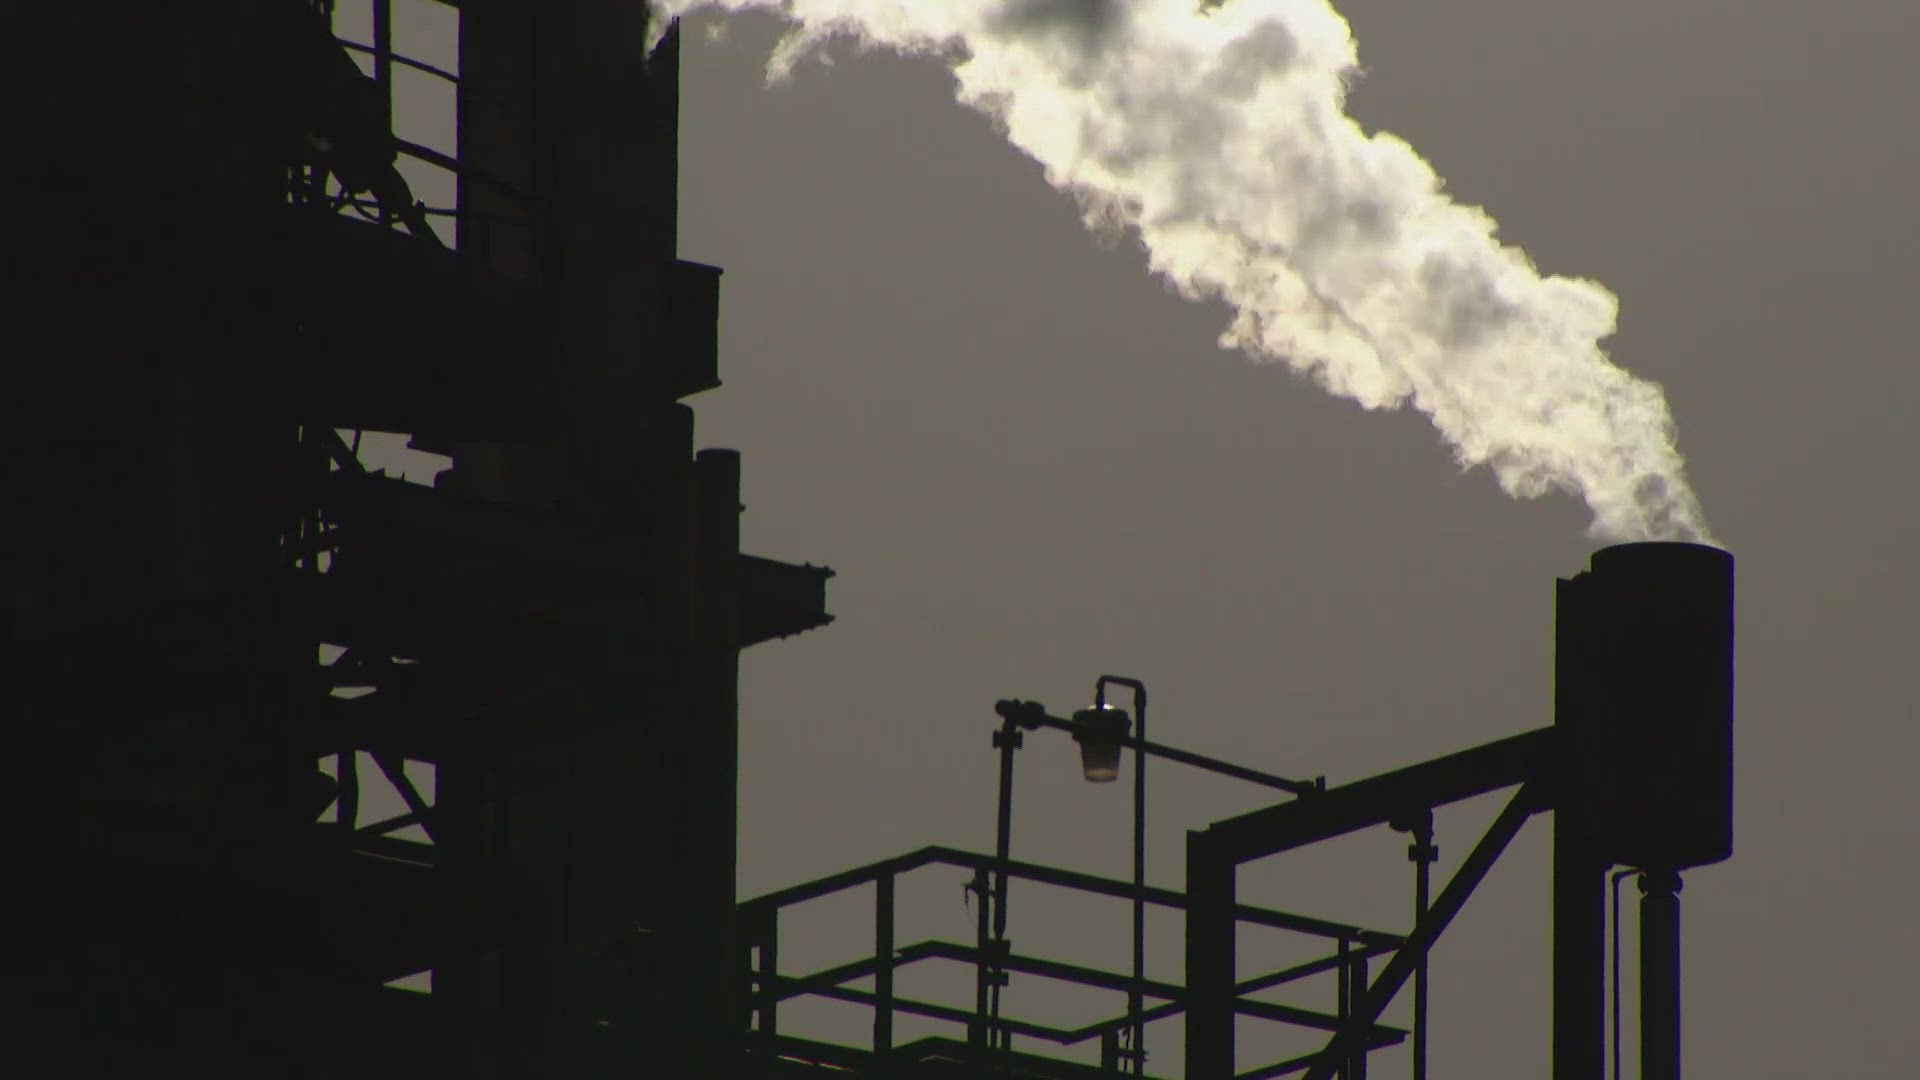 From Dec. 15 to March 15, Suncor reported more than 30 days where it exceeded its allowable levels of certain chemicals.